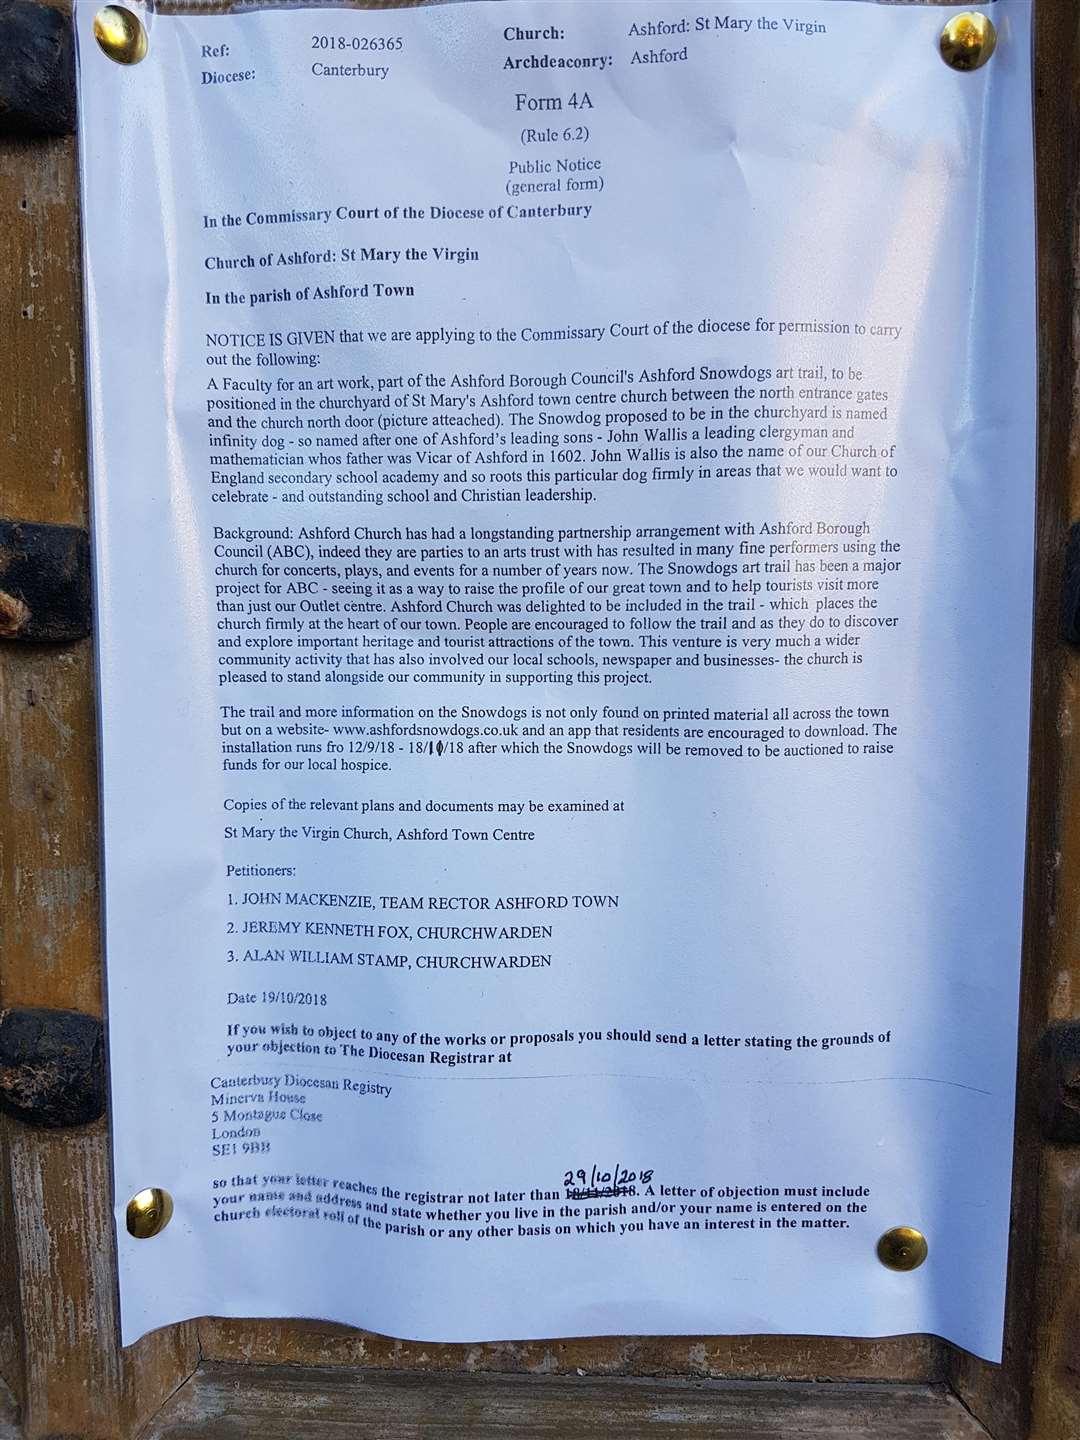 The petition was put on the church door near the Snowdog's original position. (5438784)